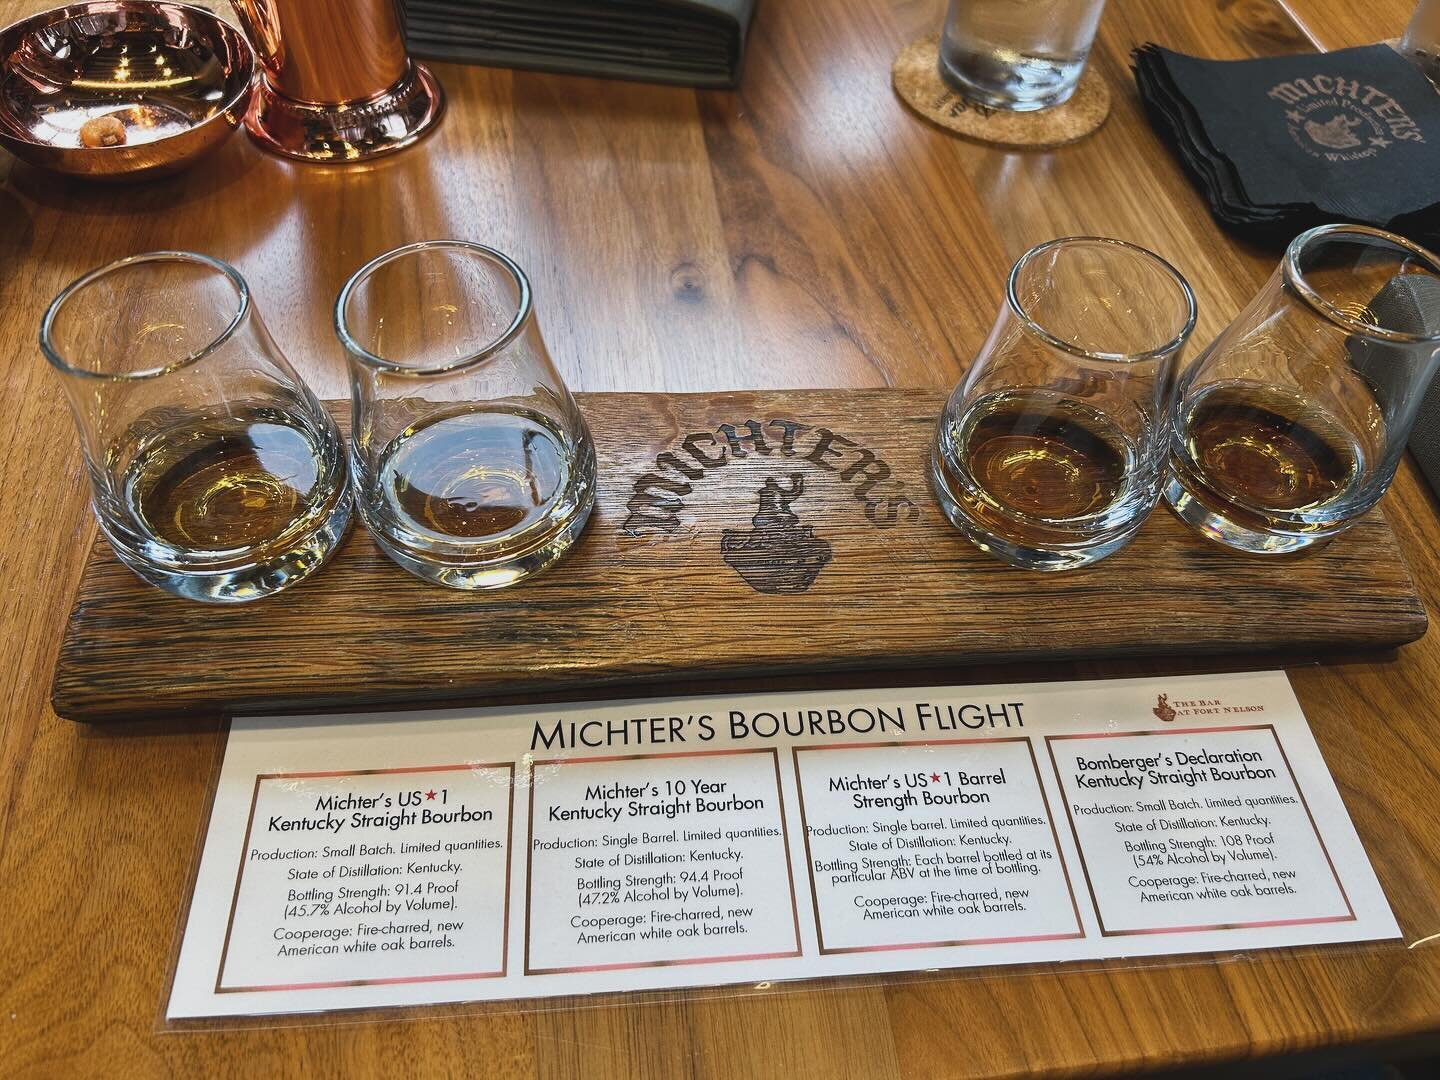 Last stop of the day! #kentuckybourbontrail #bourbon #bourbon-whiskey #liquidgold #bourbongram #whiskey #whisky #whiskeyandwatches #michters